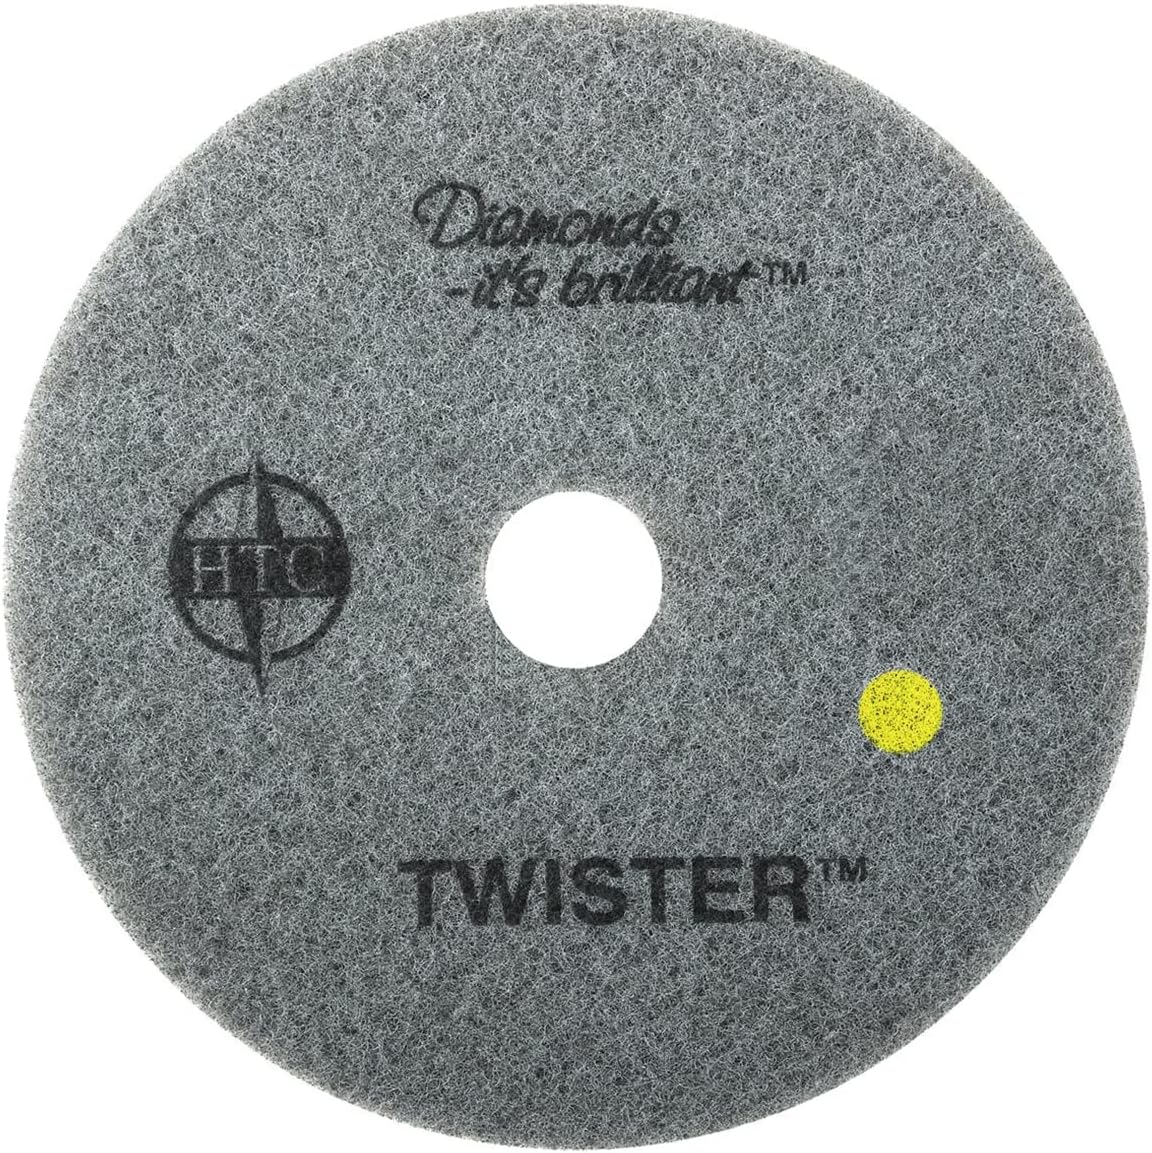 Americo Manufacturing 435427 Twister Yellow 1500 Grit Floor Pad Review